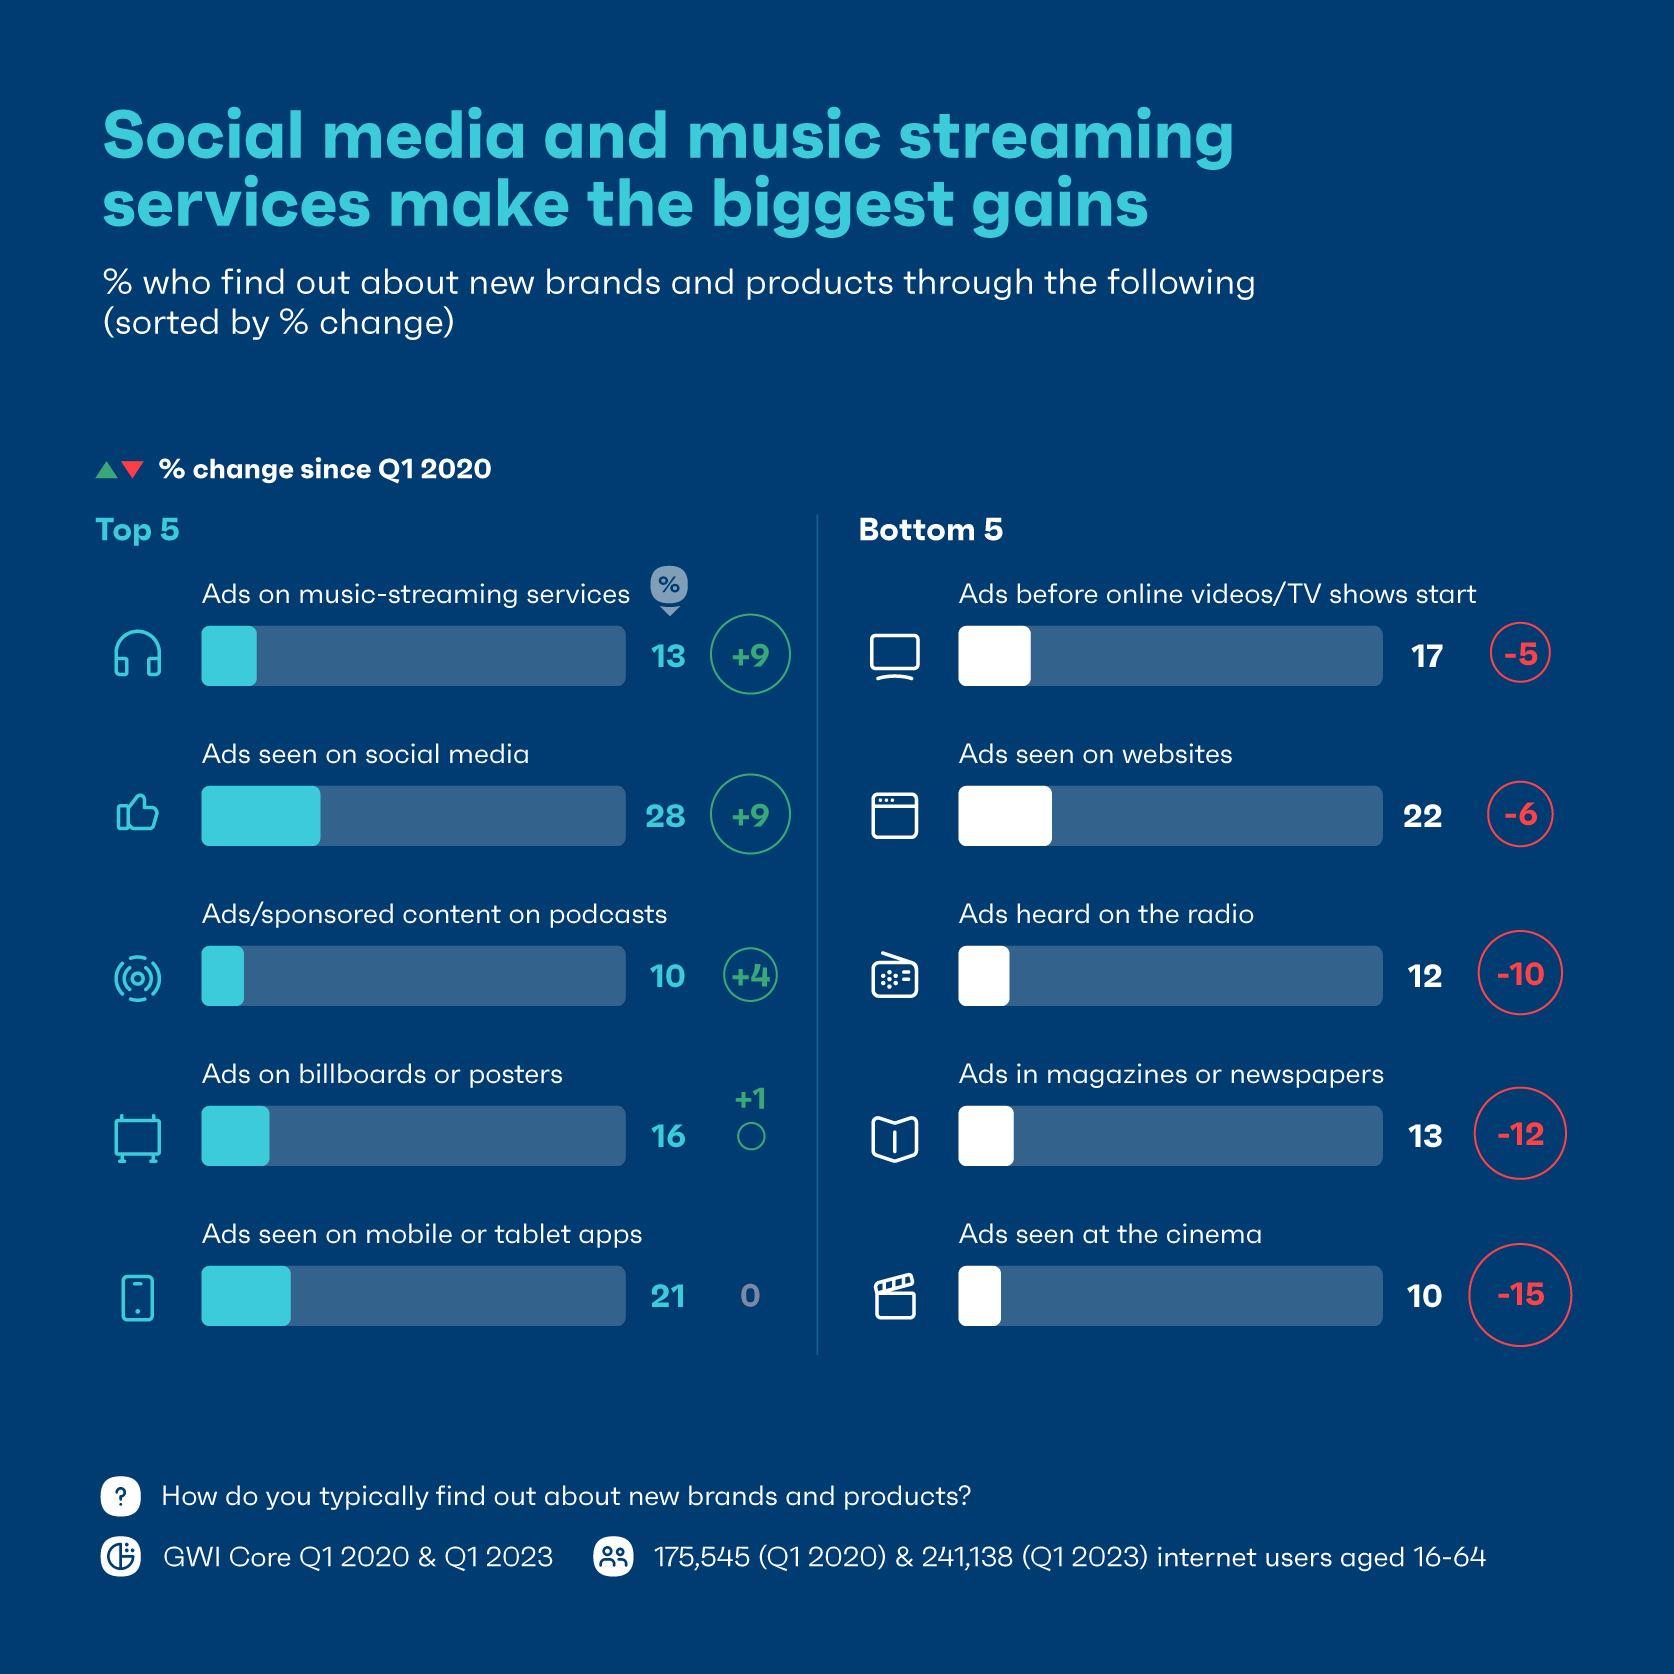 Social media and music streaming services make the biggest gains